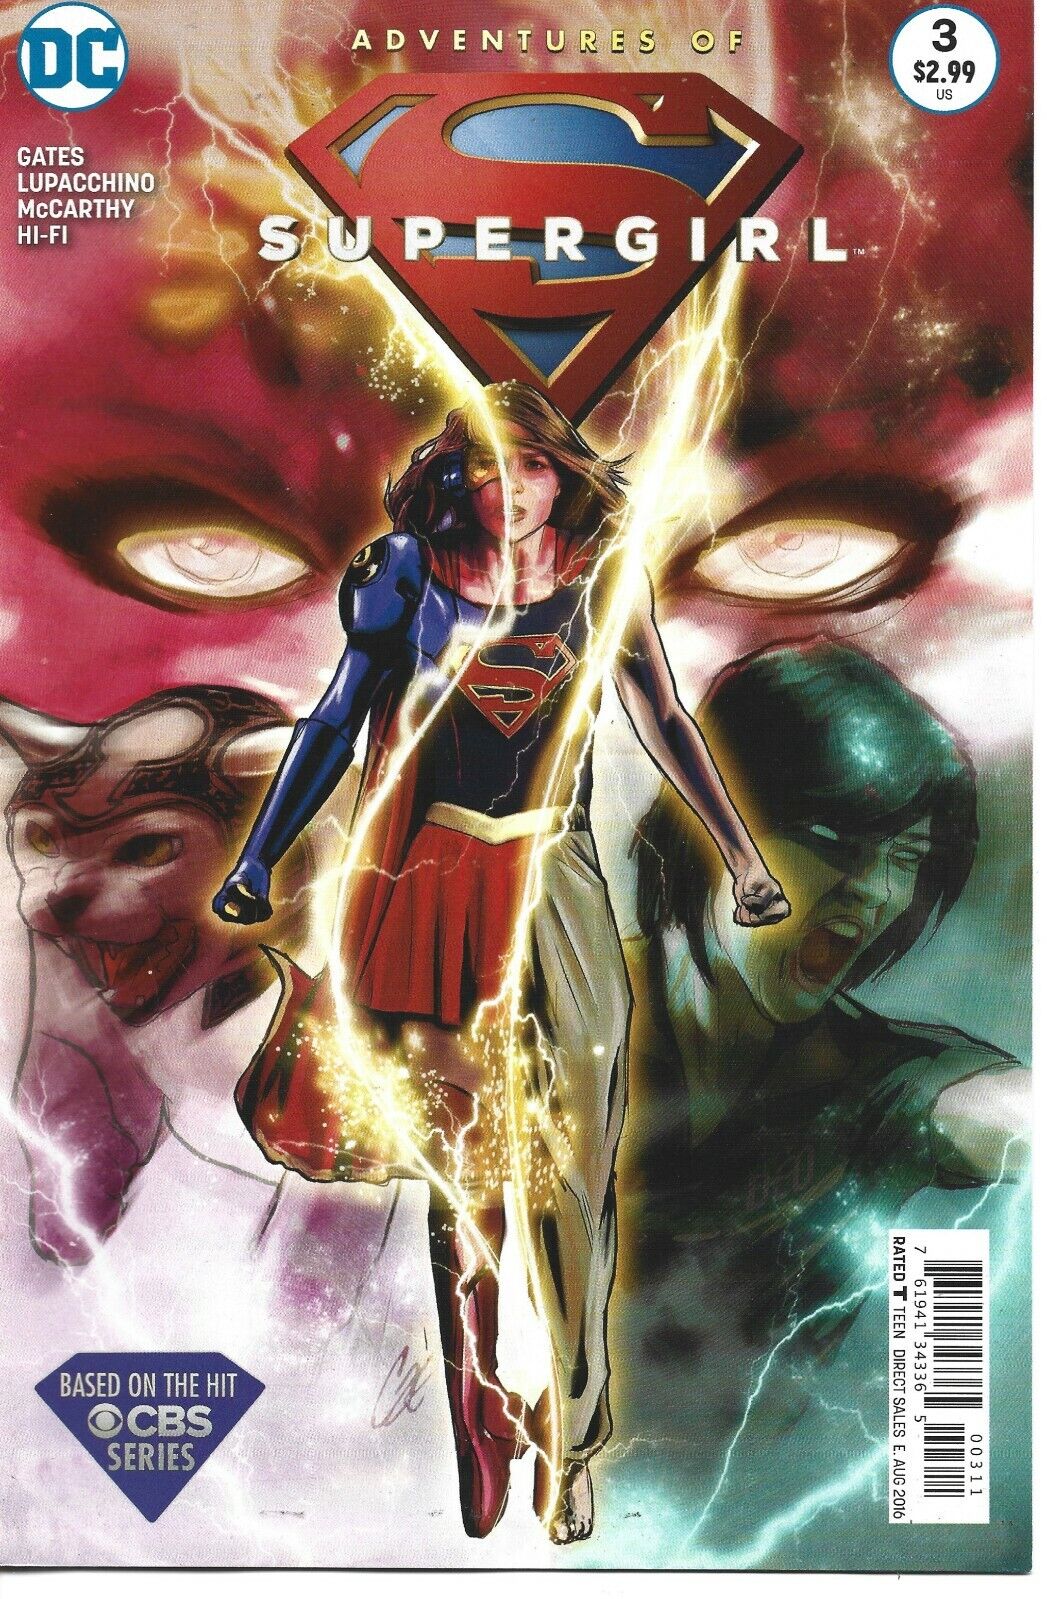 SUPERGIRL #3 DC COMICS 2016 BAGGED AND BOARDED 